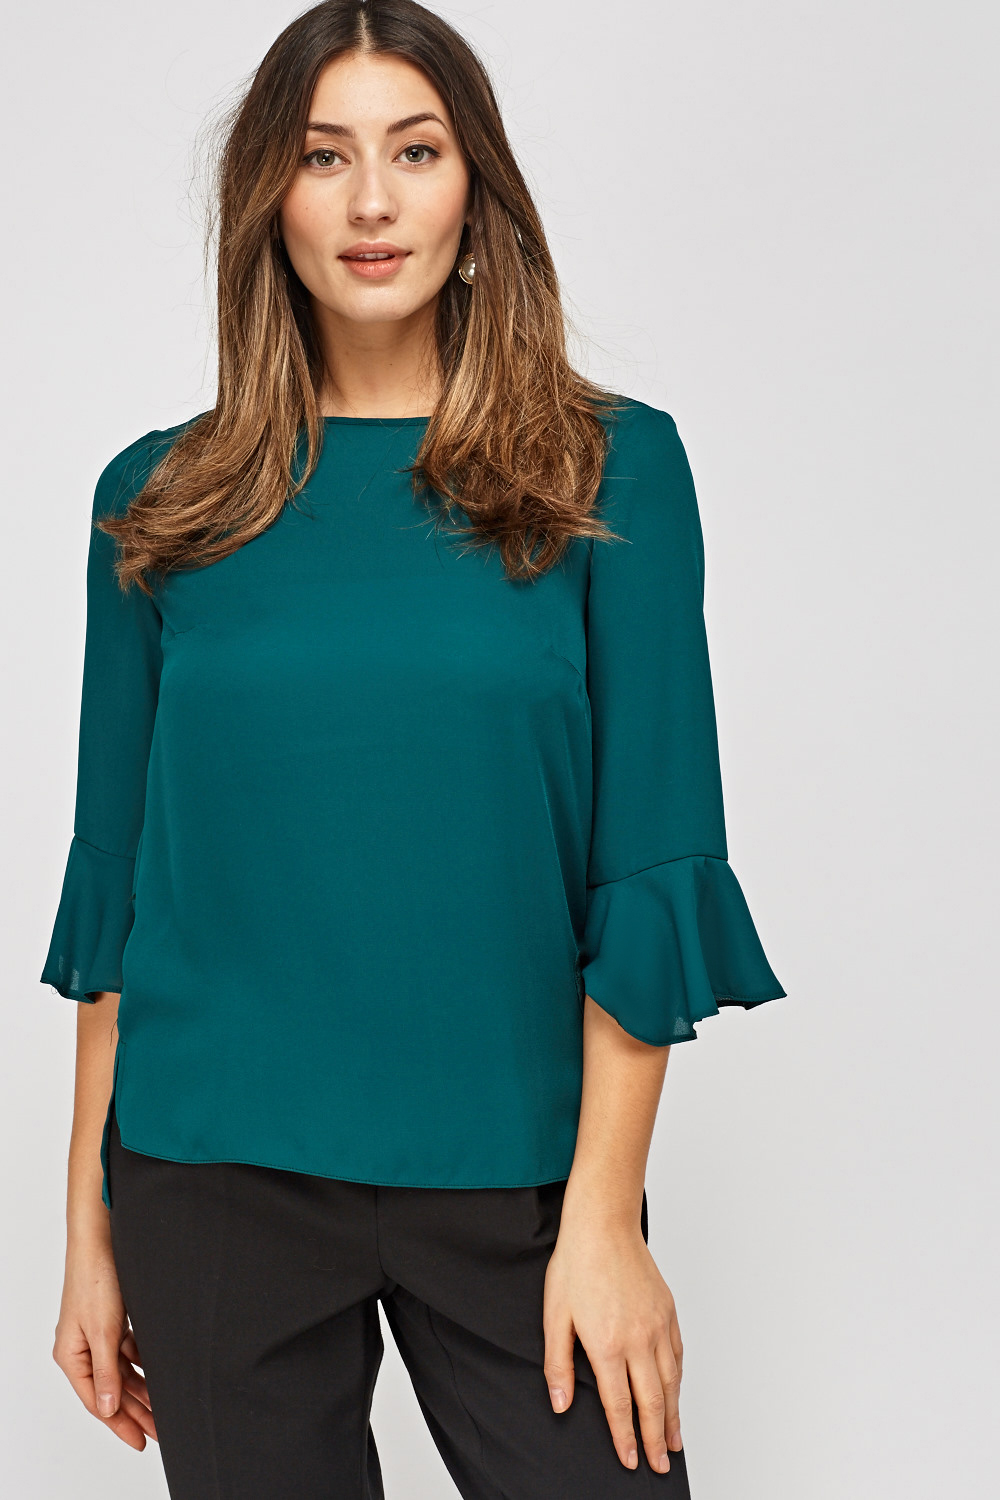 Forest Green Sheer Blouse Just 7